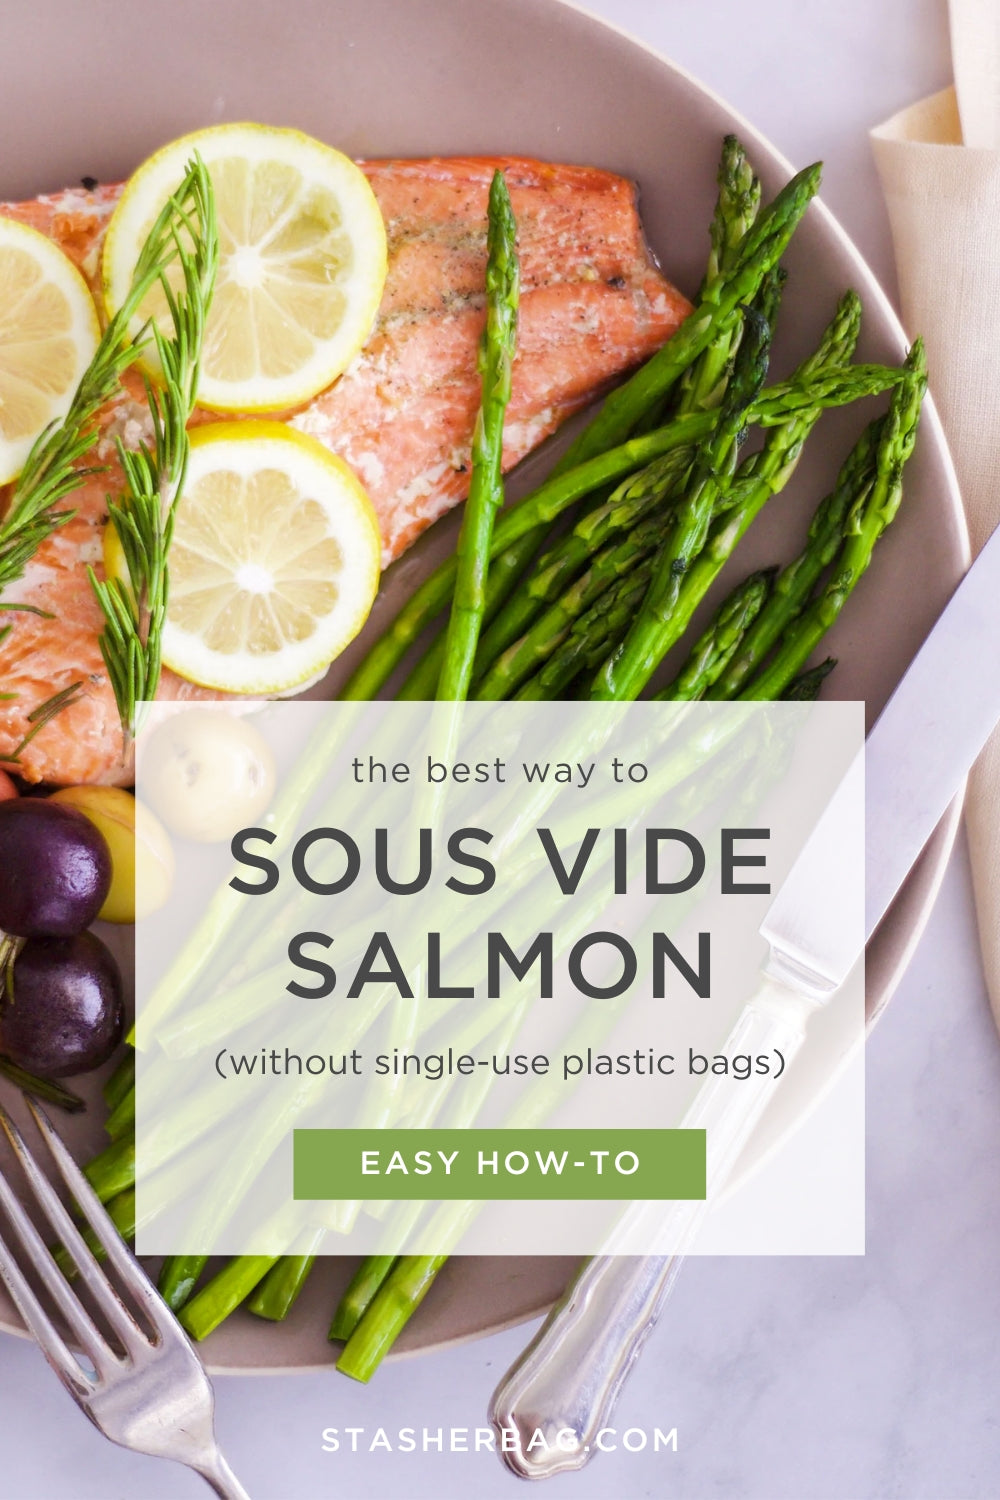 How to Sous Vide Salmon with Stasher Reusable Sous Vide Bags